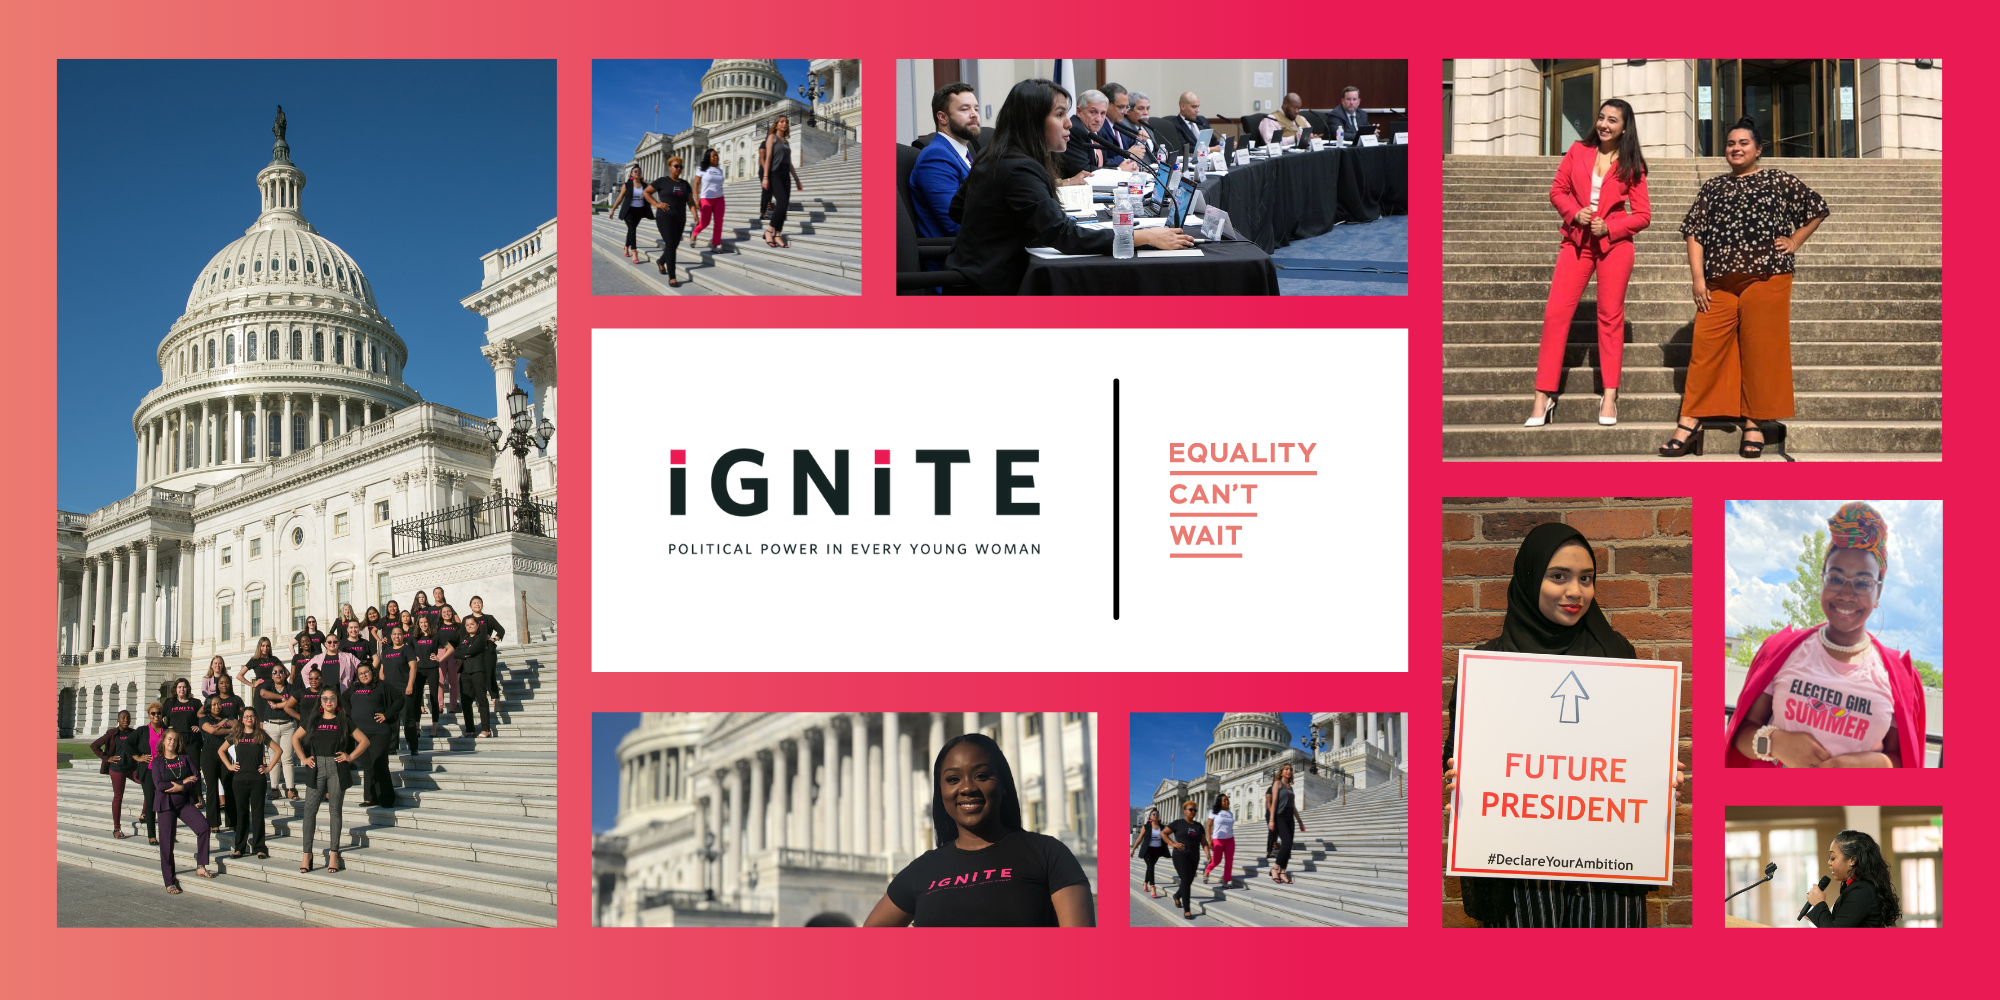 IGNITE named as Equality Can’t Wait Challenge award recipient